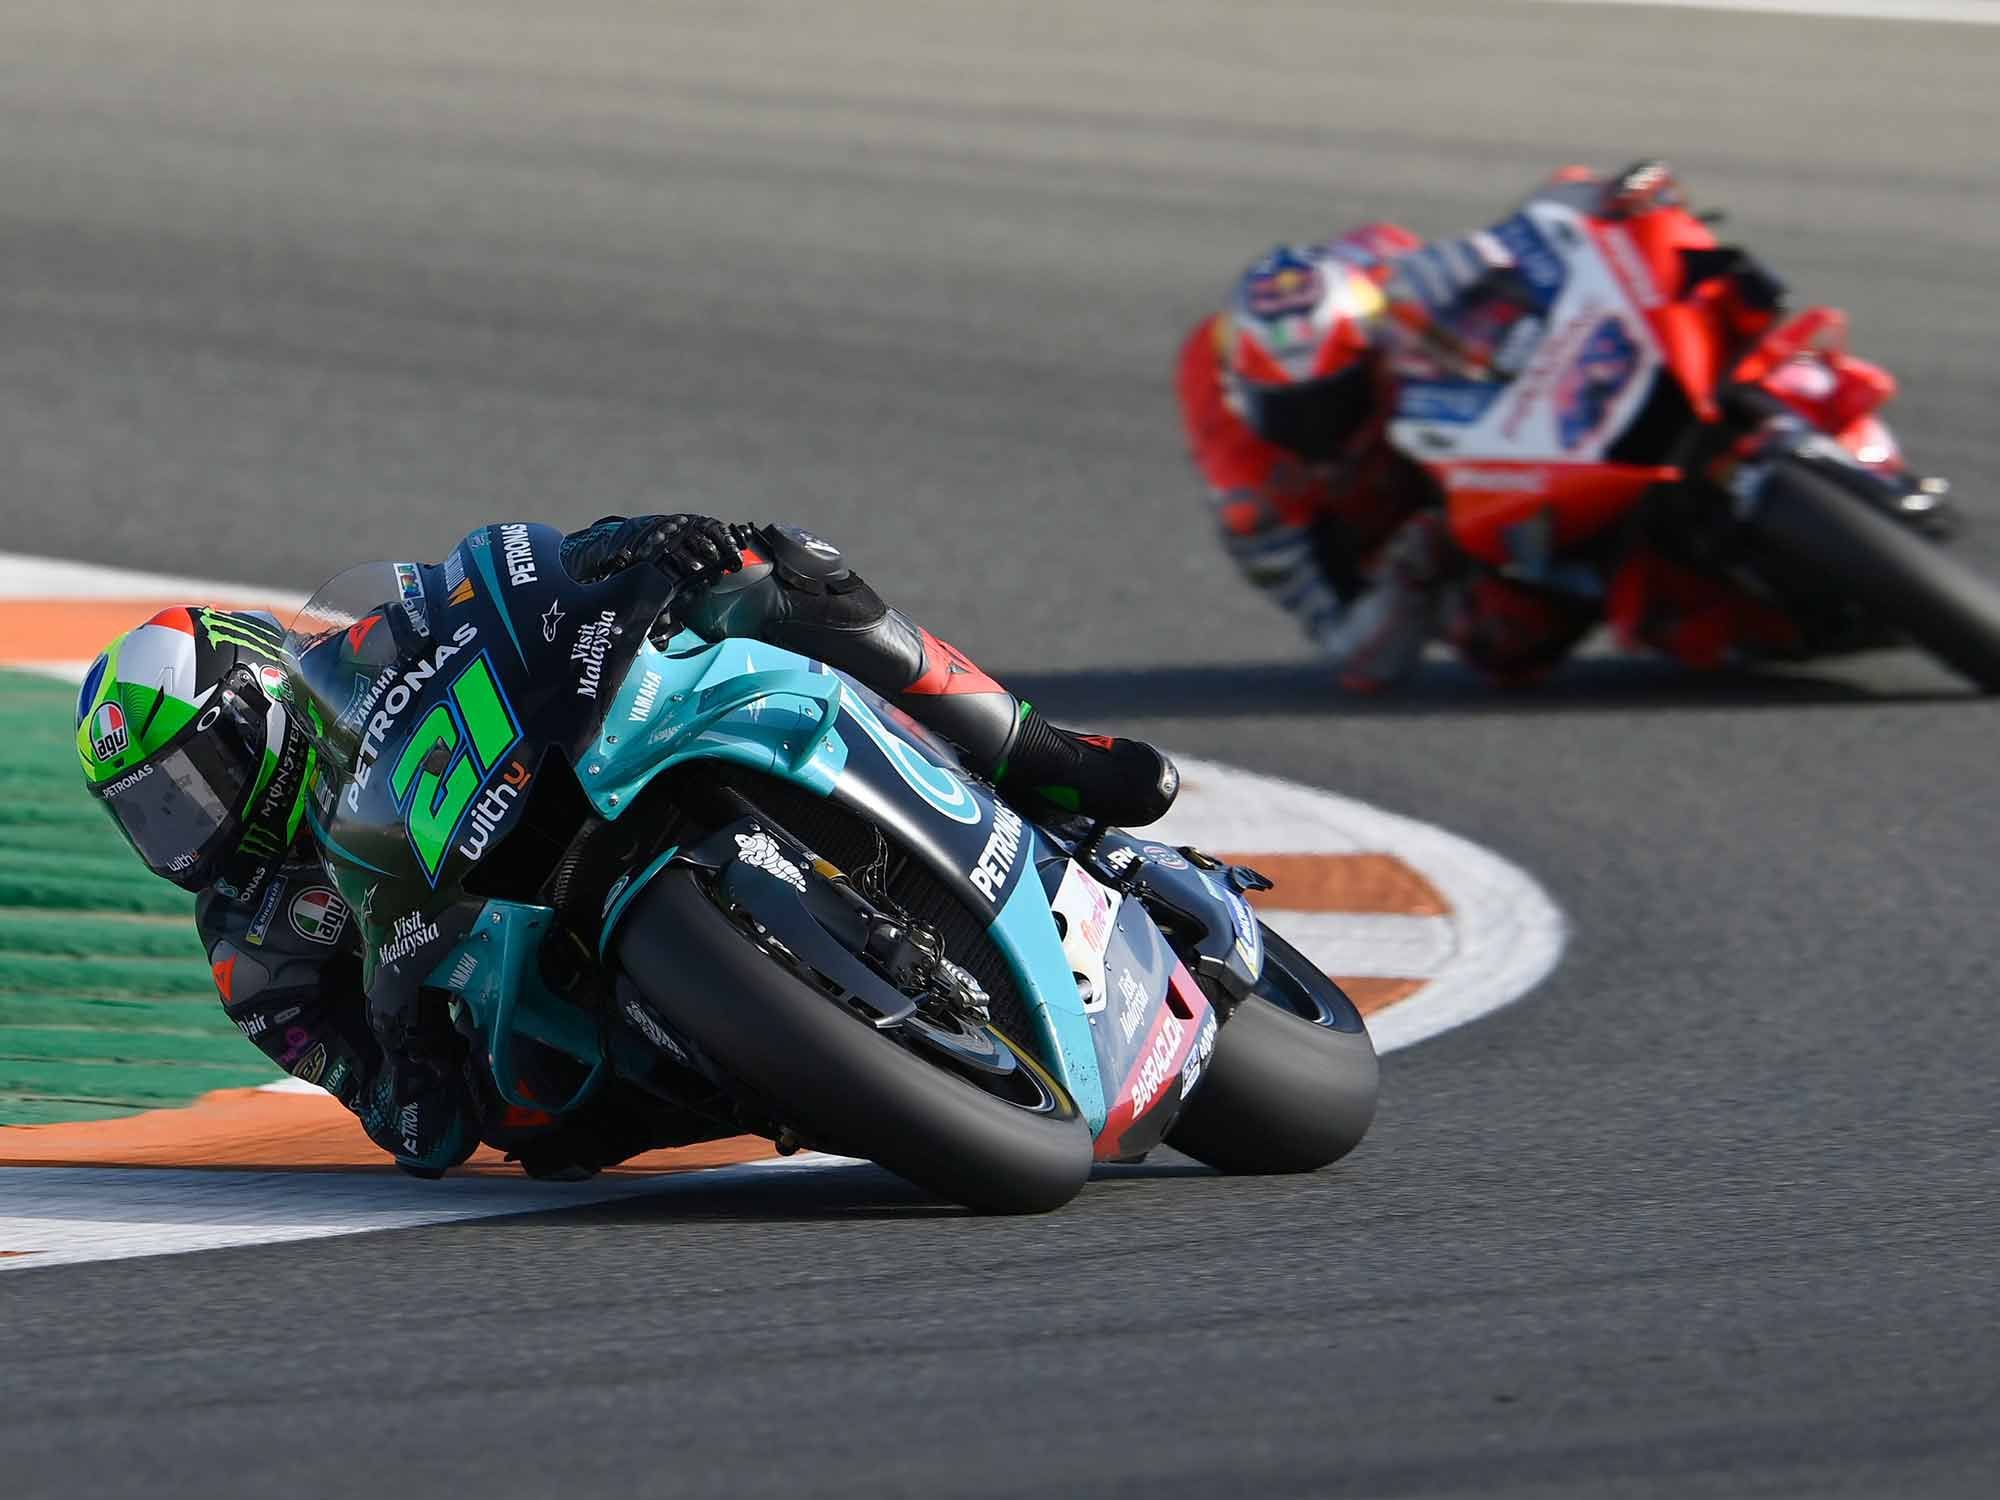 Franco Morbidelli turned quick qualifying into a solid race win ahead of Jack Miller.